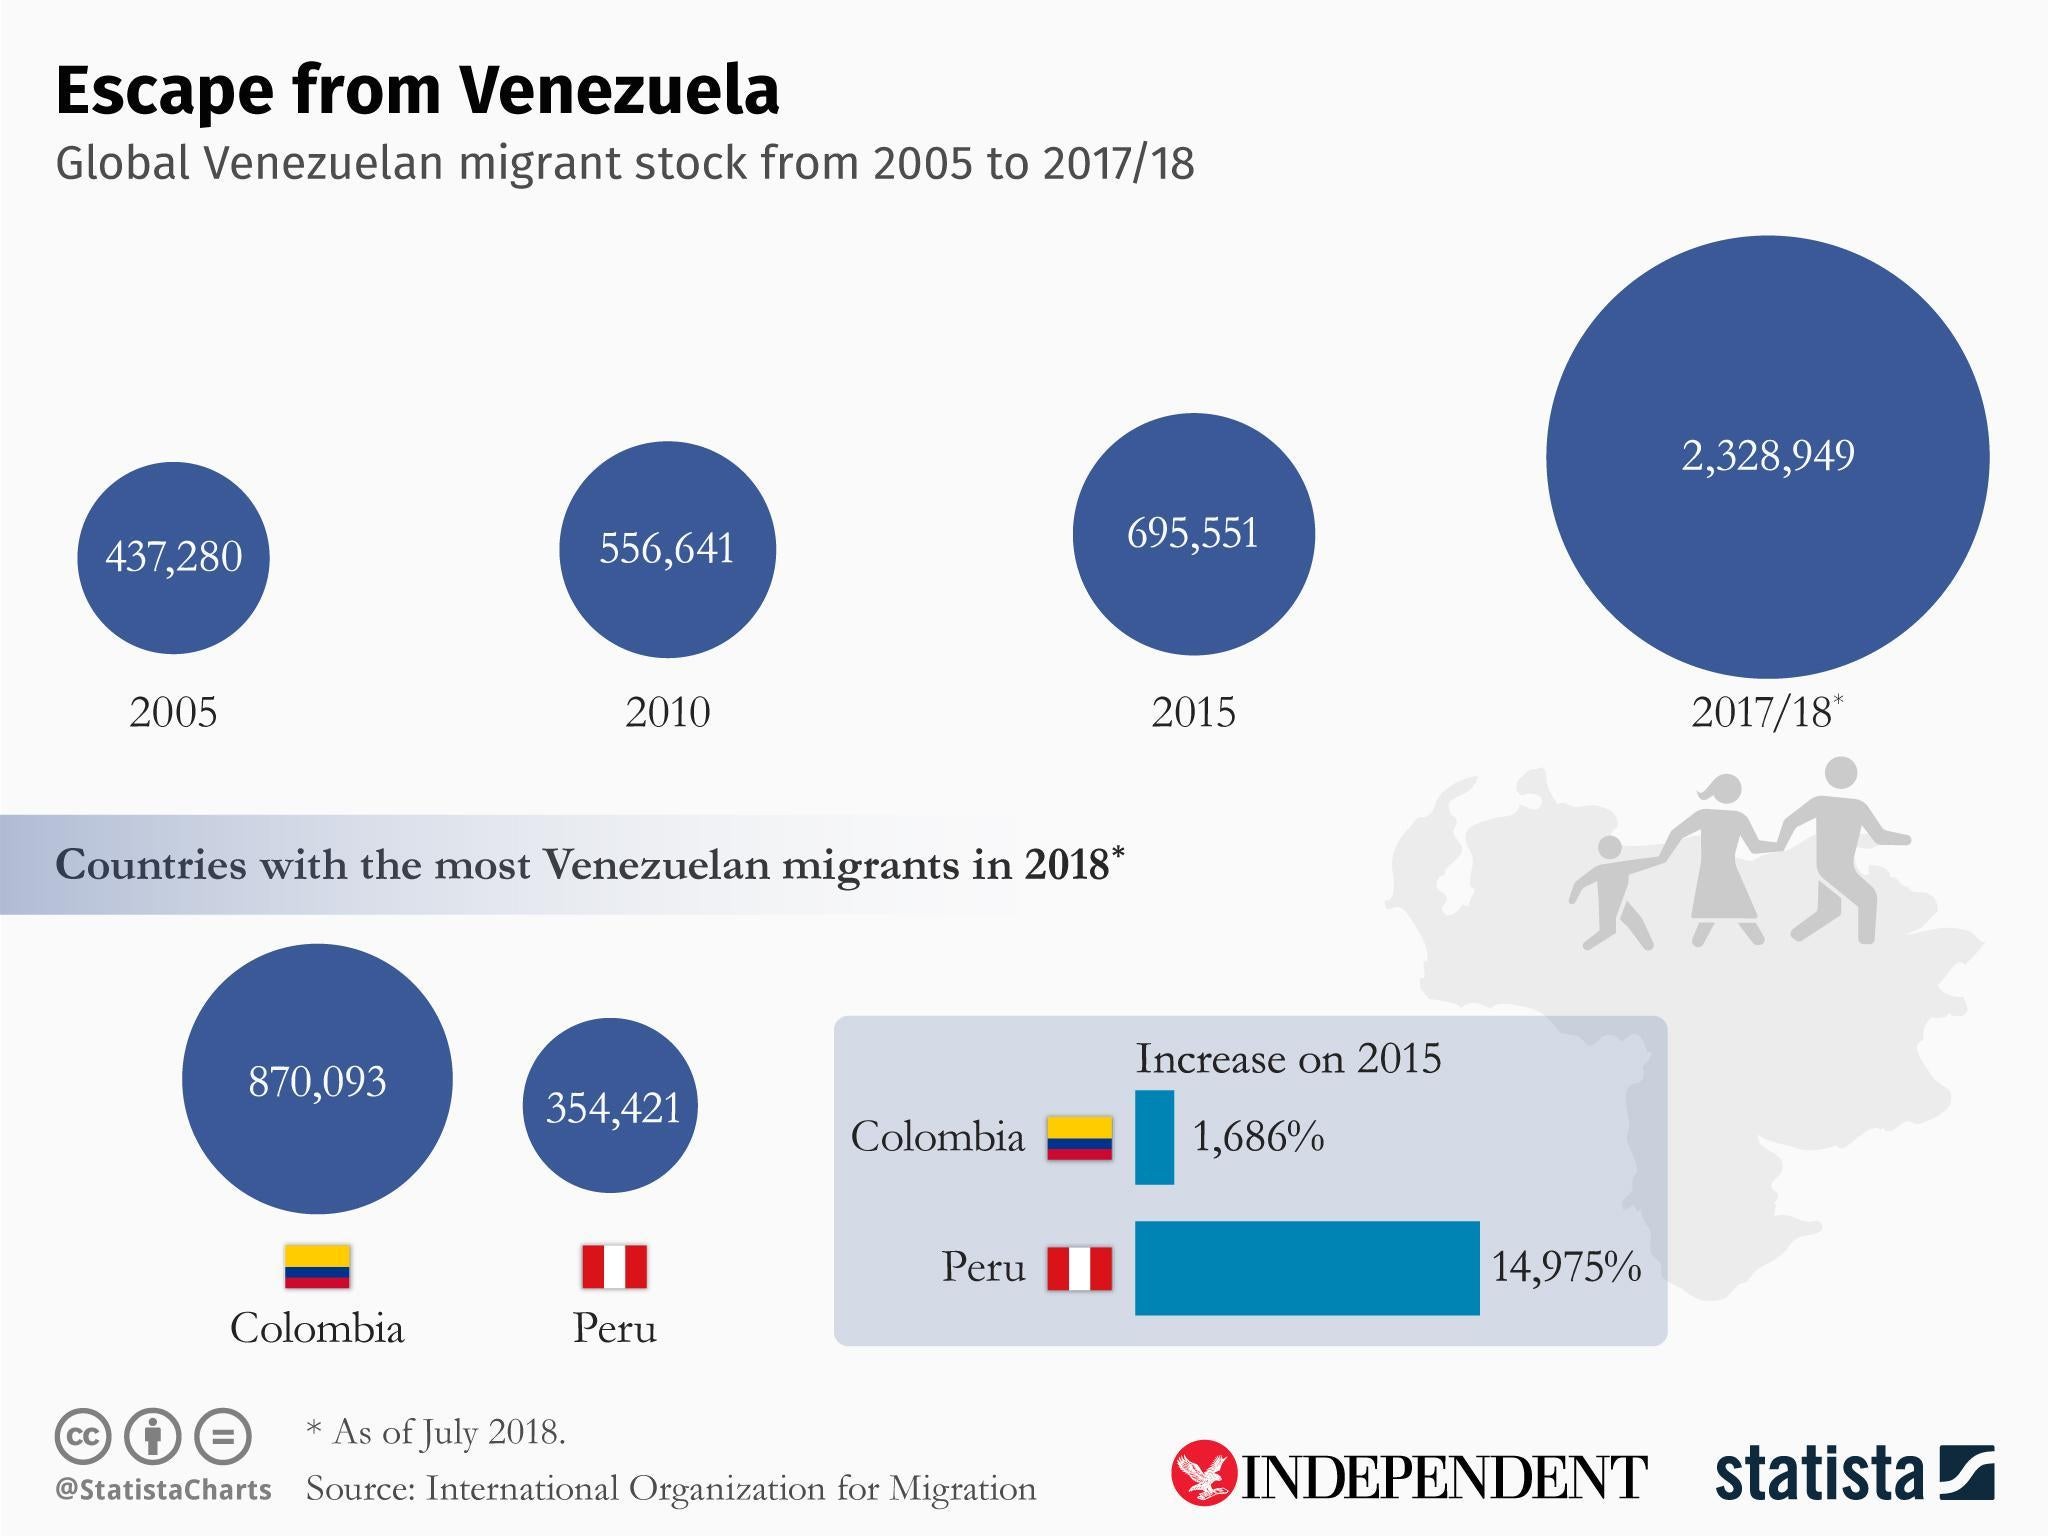 Millions of people have emigrated from Venezuela amid sky-high inflation and food shortages